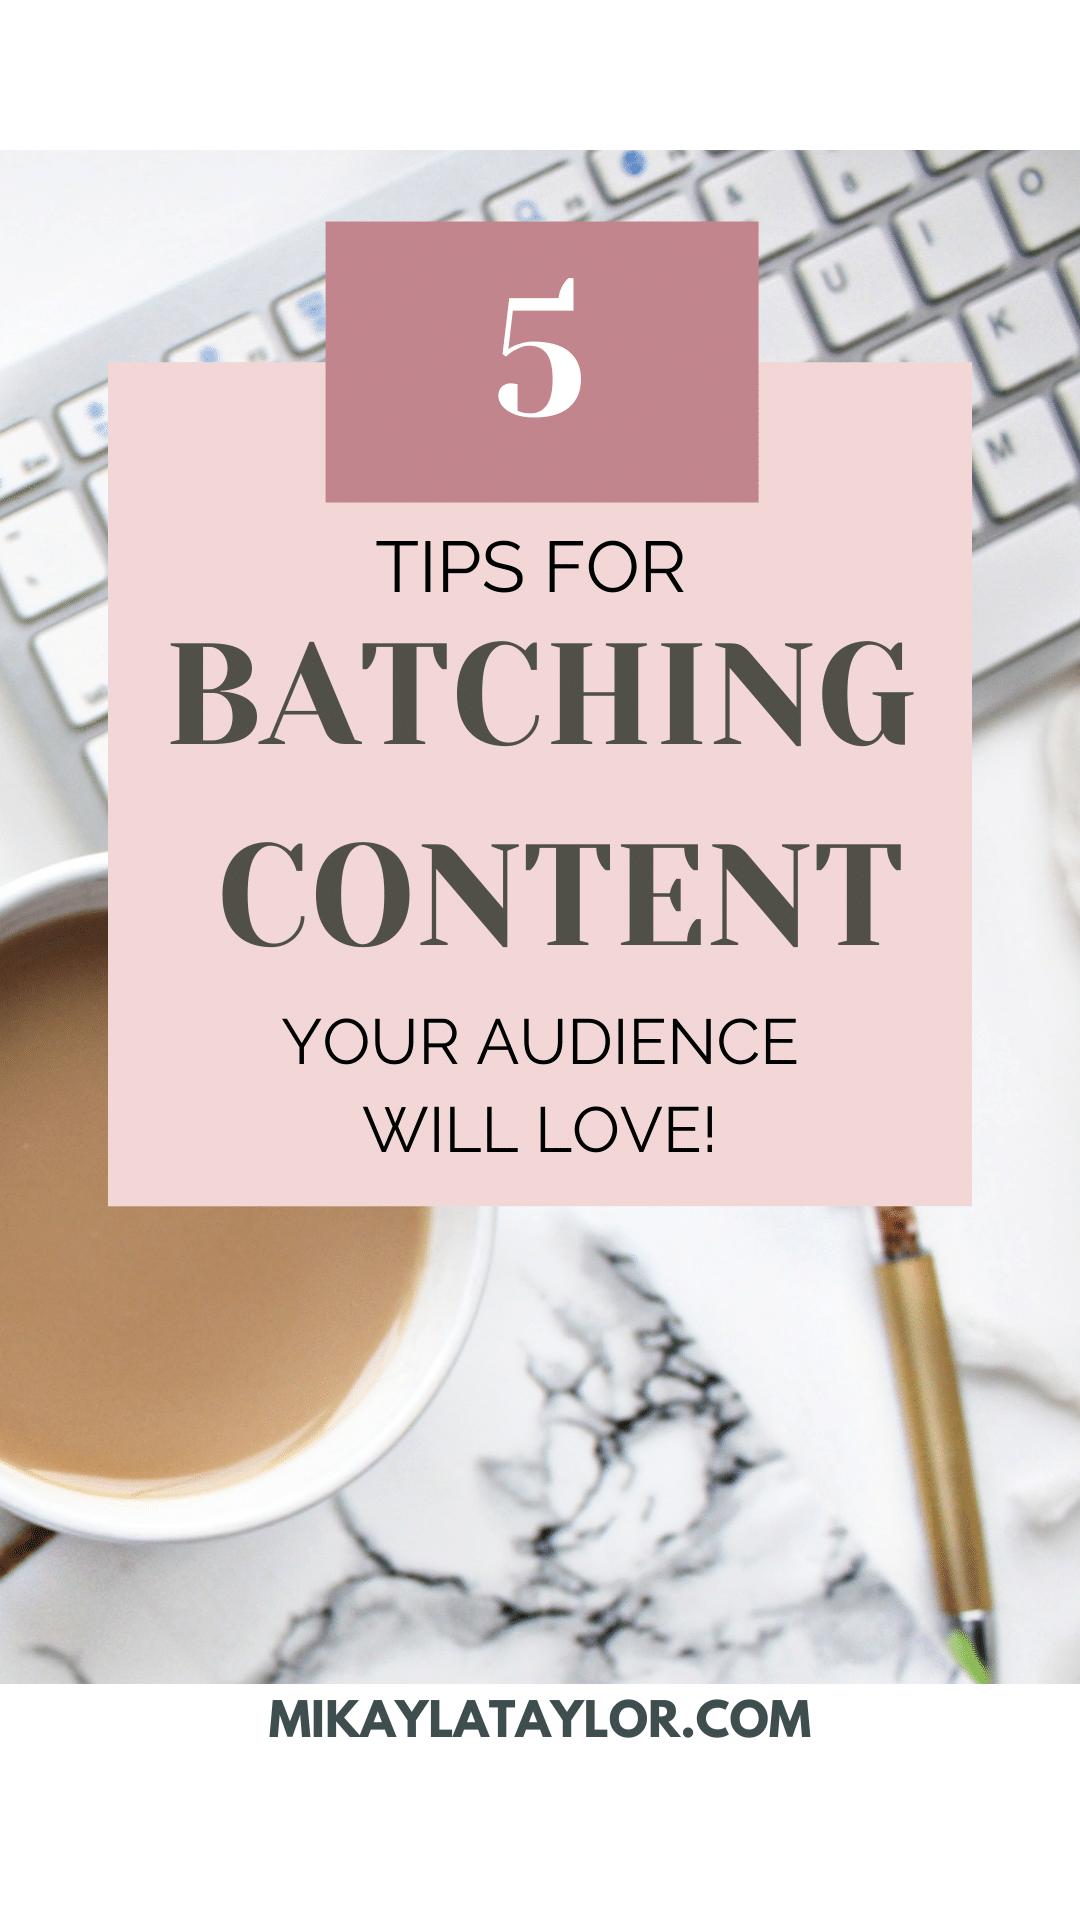 Pin 2 5 Tips for Batching Content Your Audience Will Love Mikayla Taylor